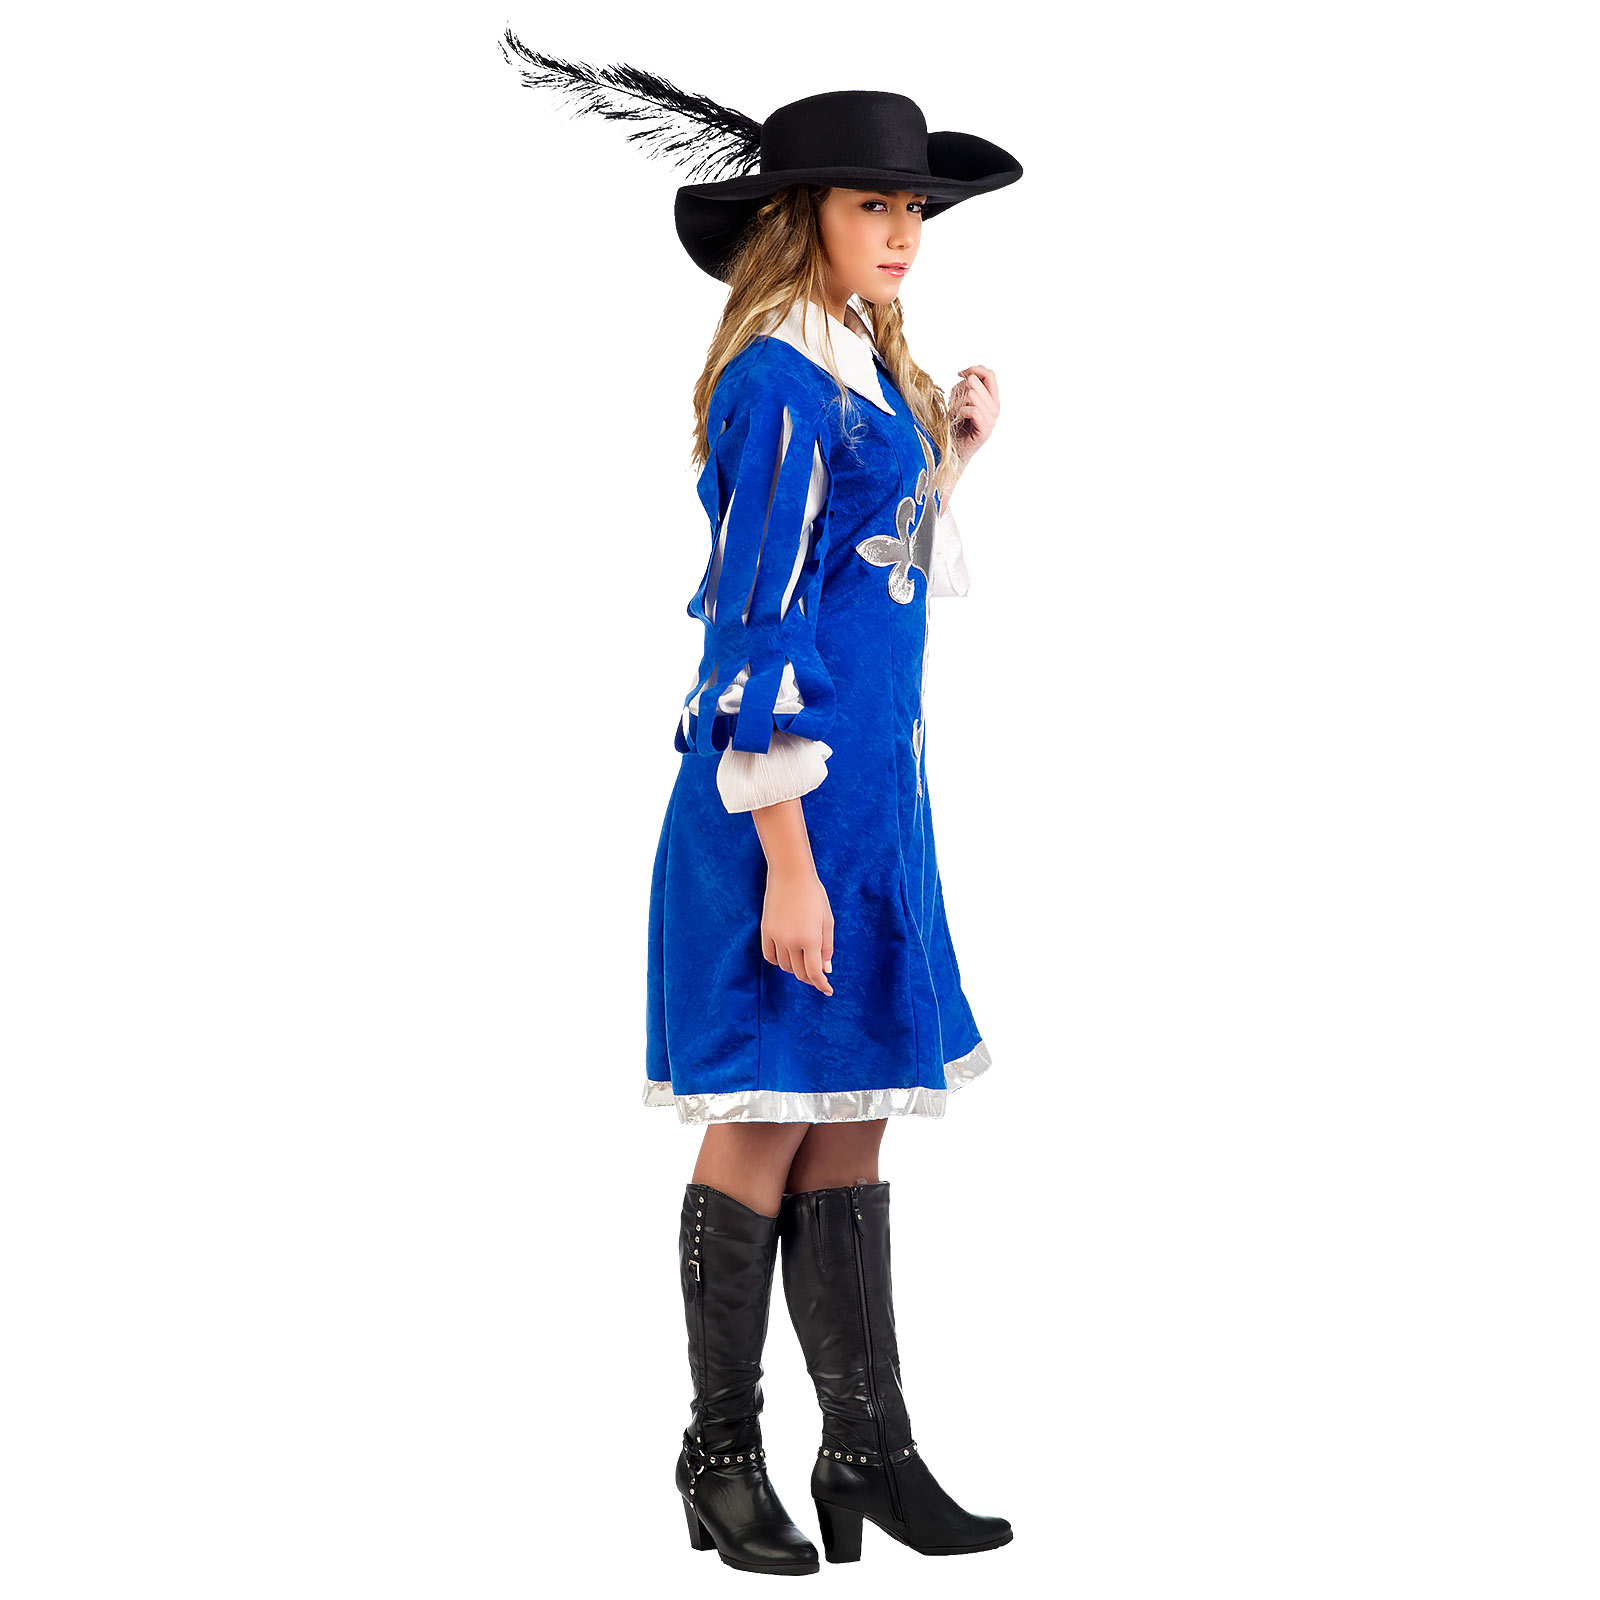 Royal Musketeer Lady - Women's Costume Blue